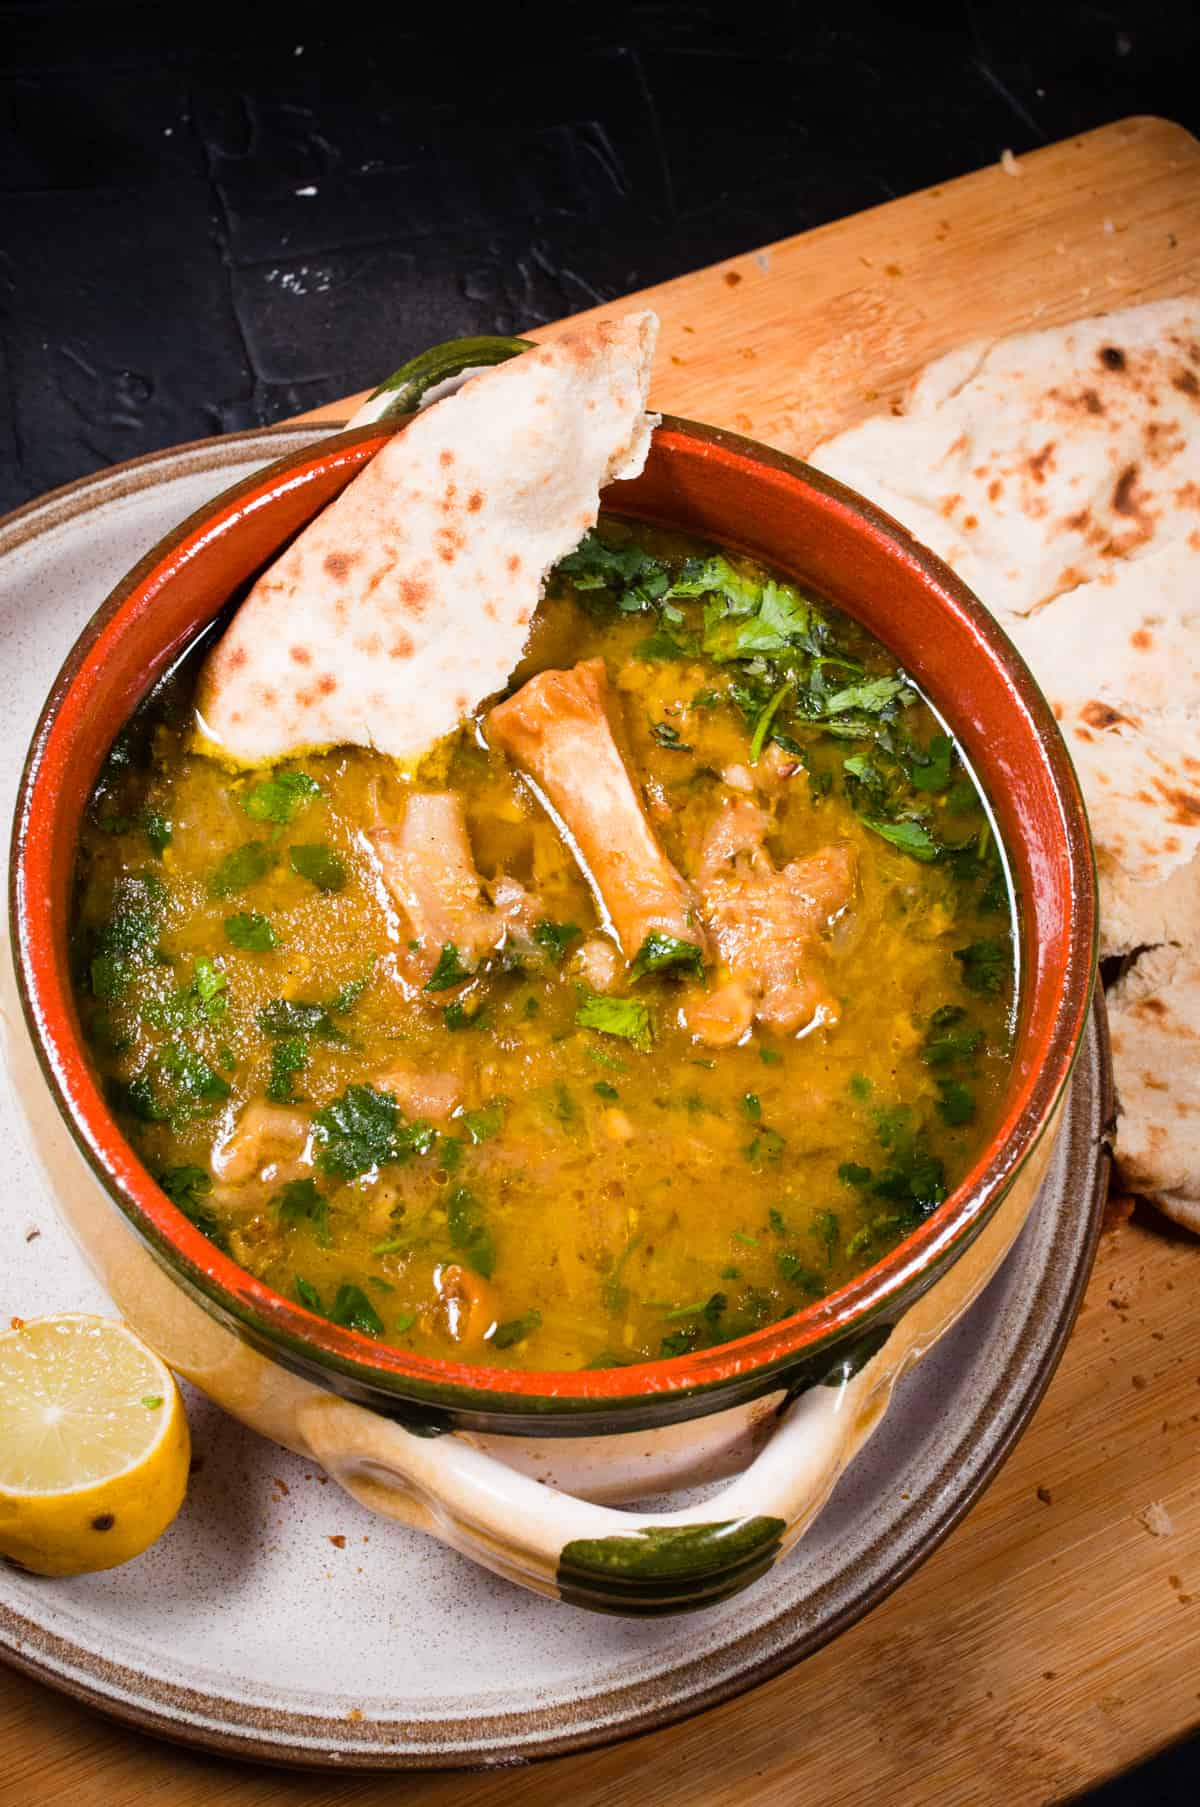 Paya served with naan bread.